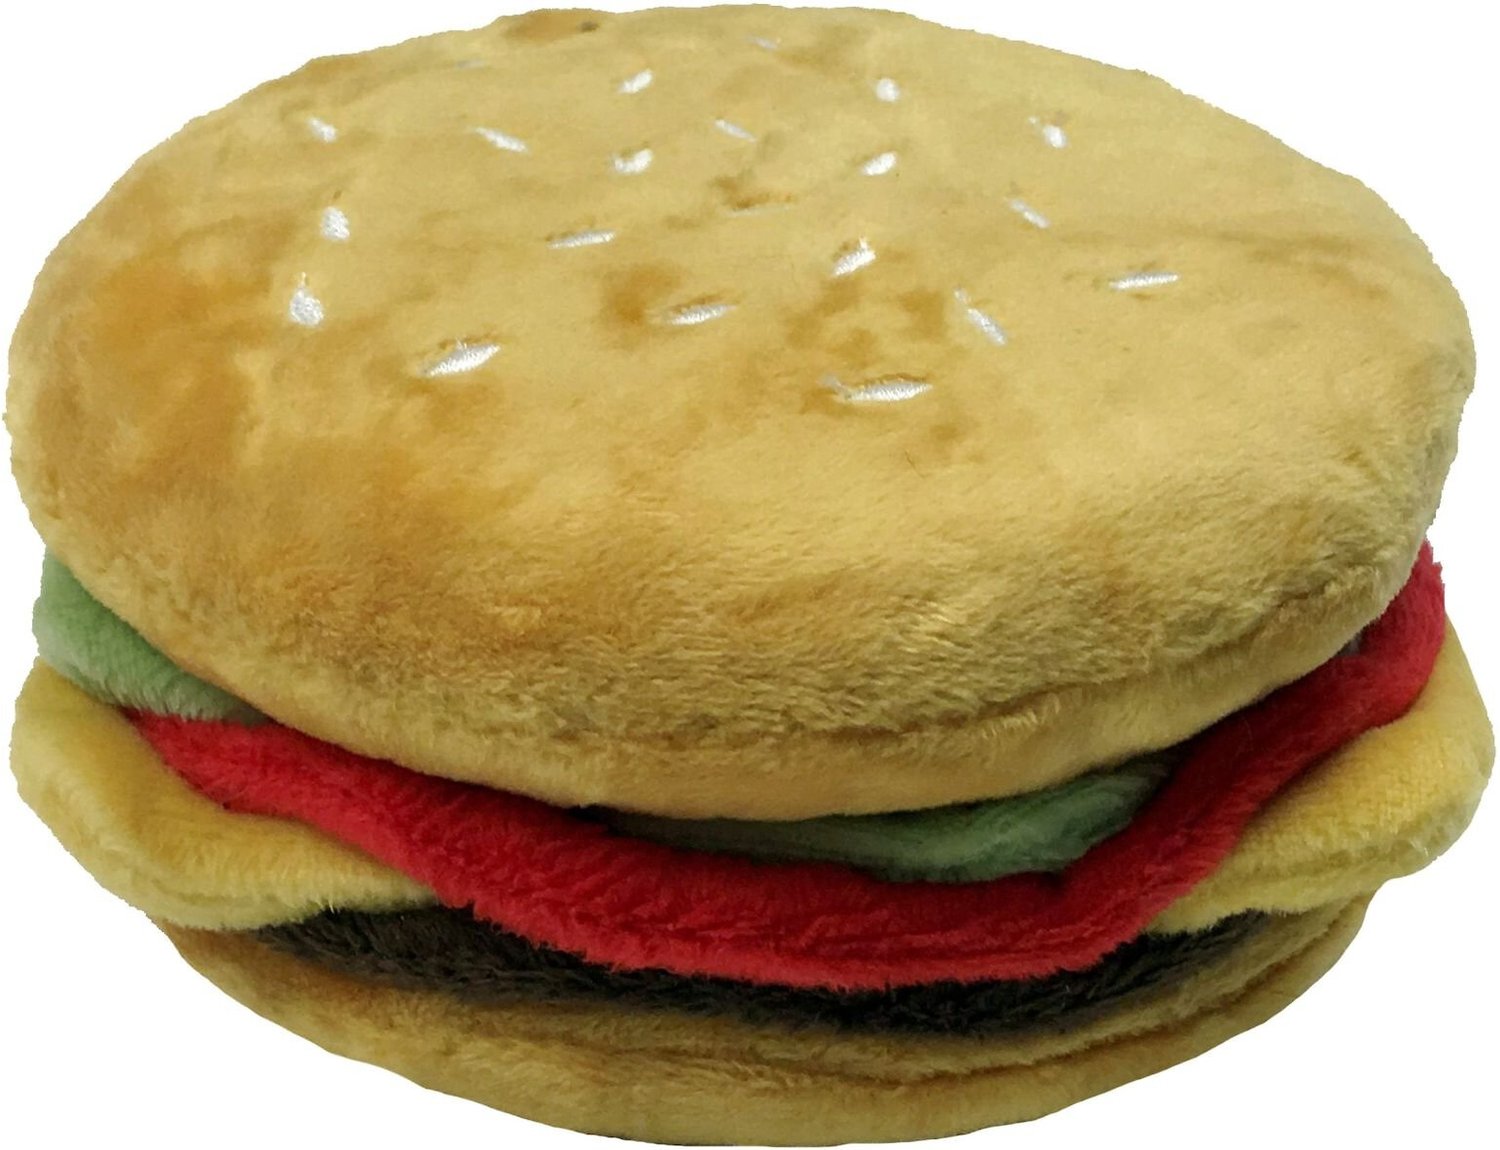 squeaky burger dog toy